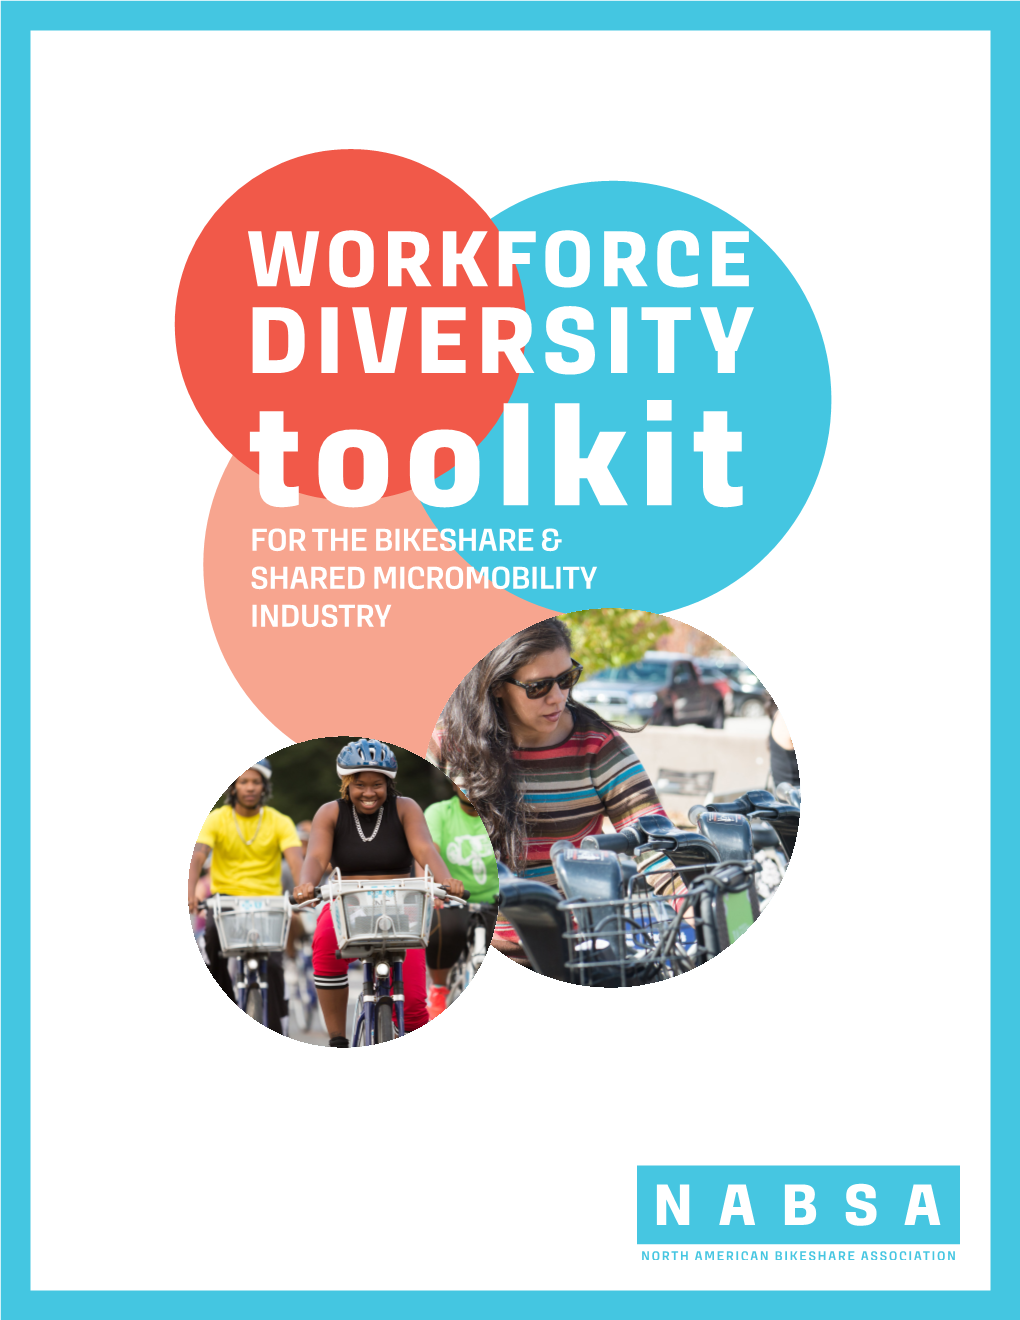 Diversity Hiring Diversity Hiring Highlights Tips for Creating Diversity Hiring Standards and Intentional Hiring Practices That Serve to Reach Those Standards